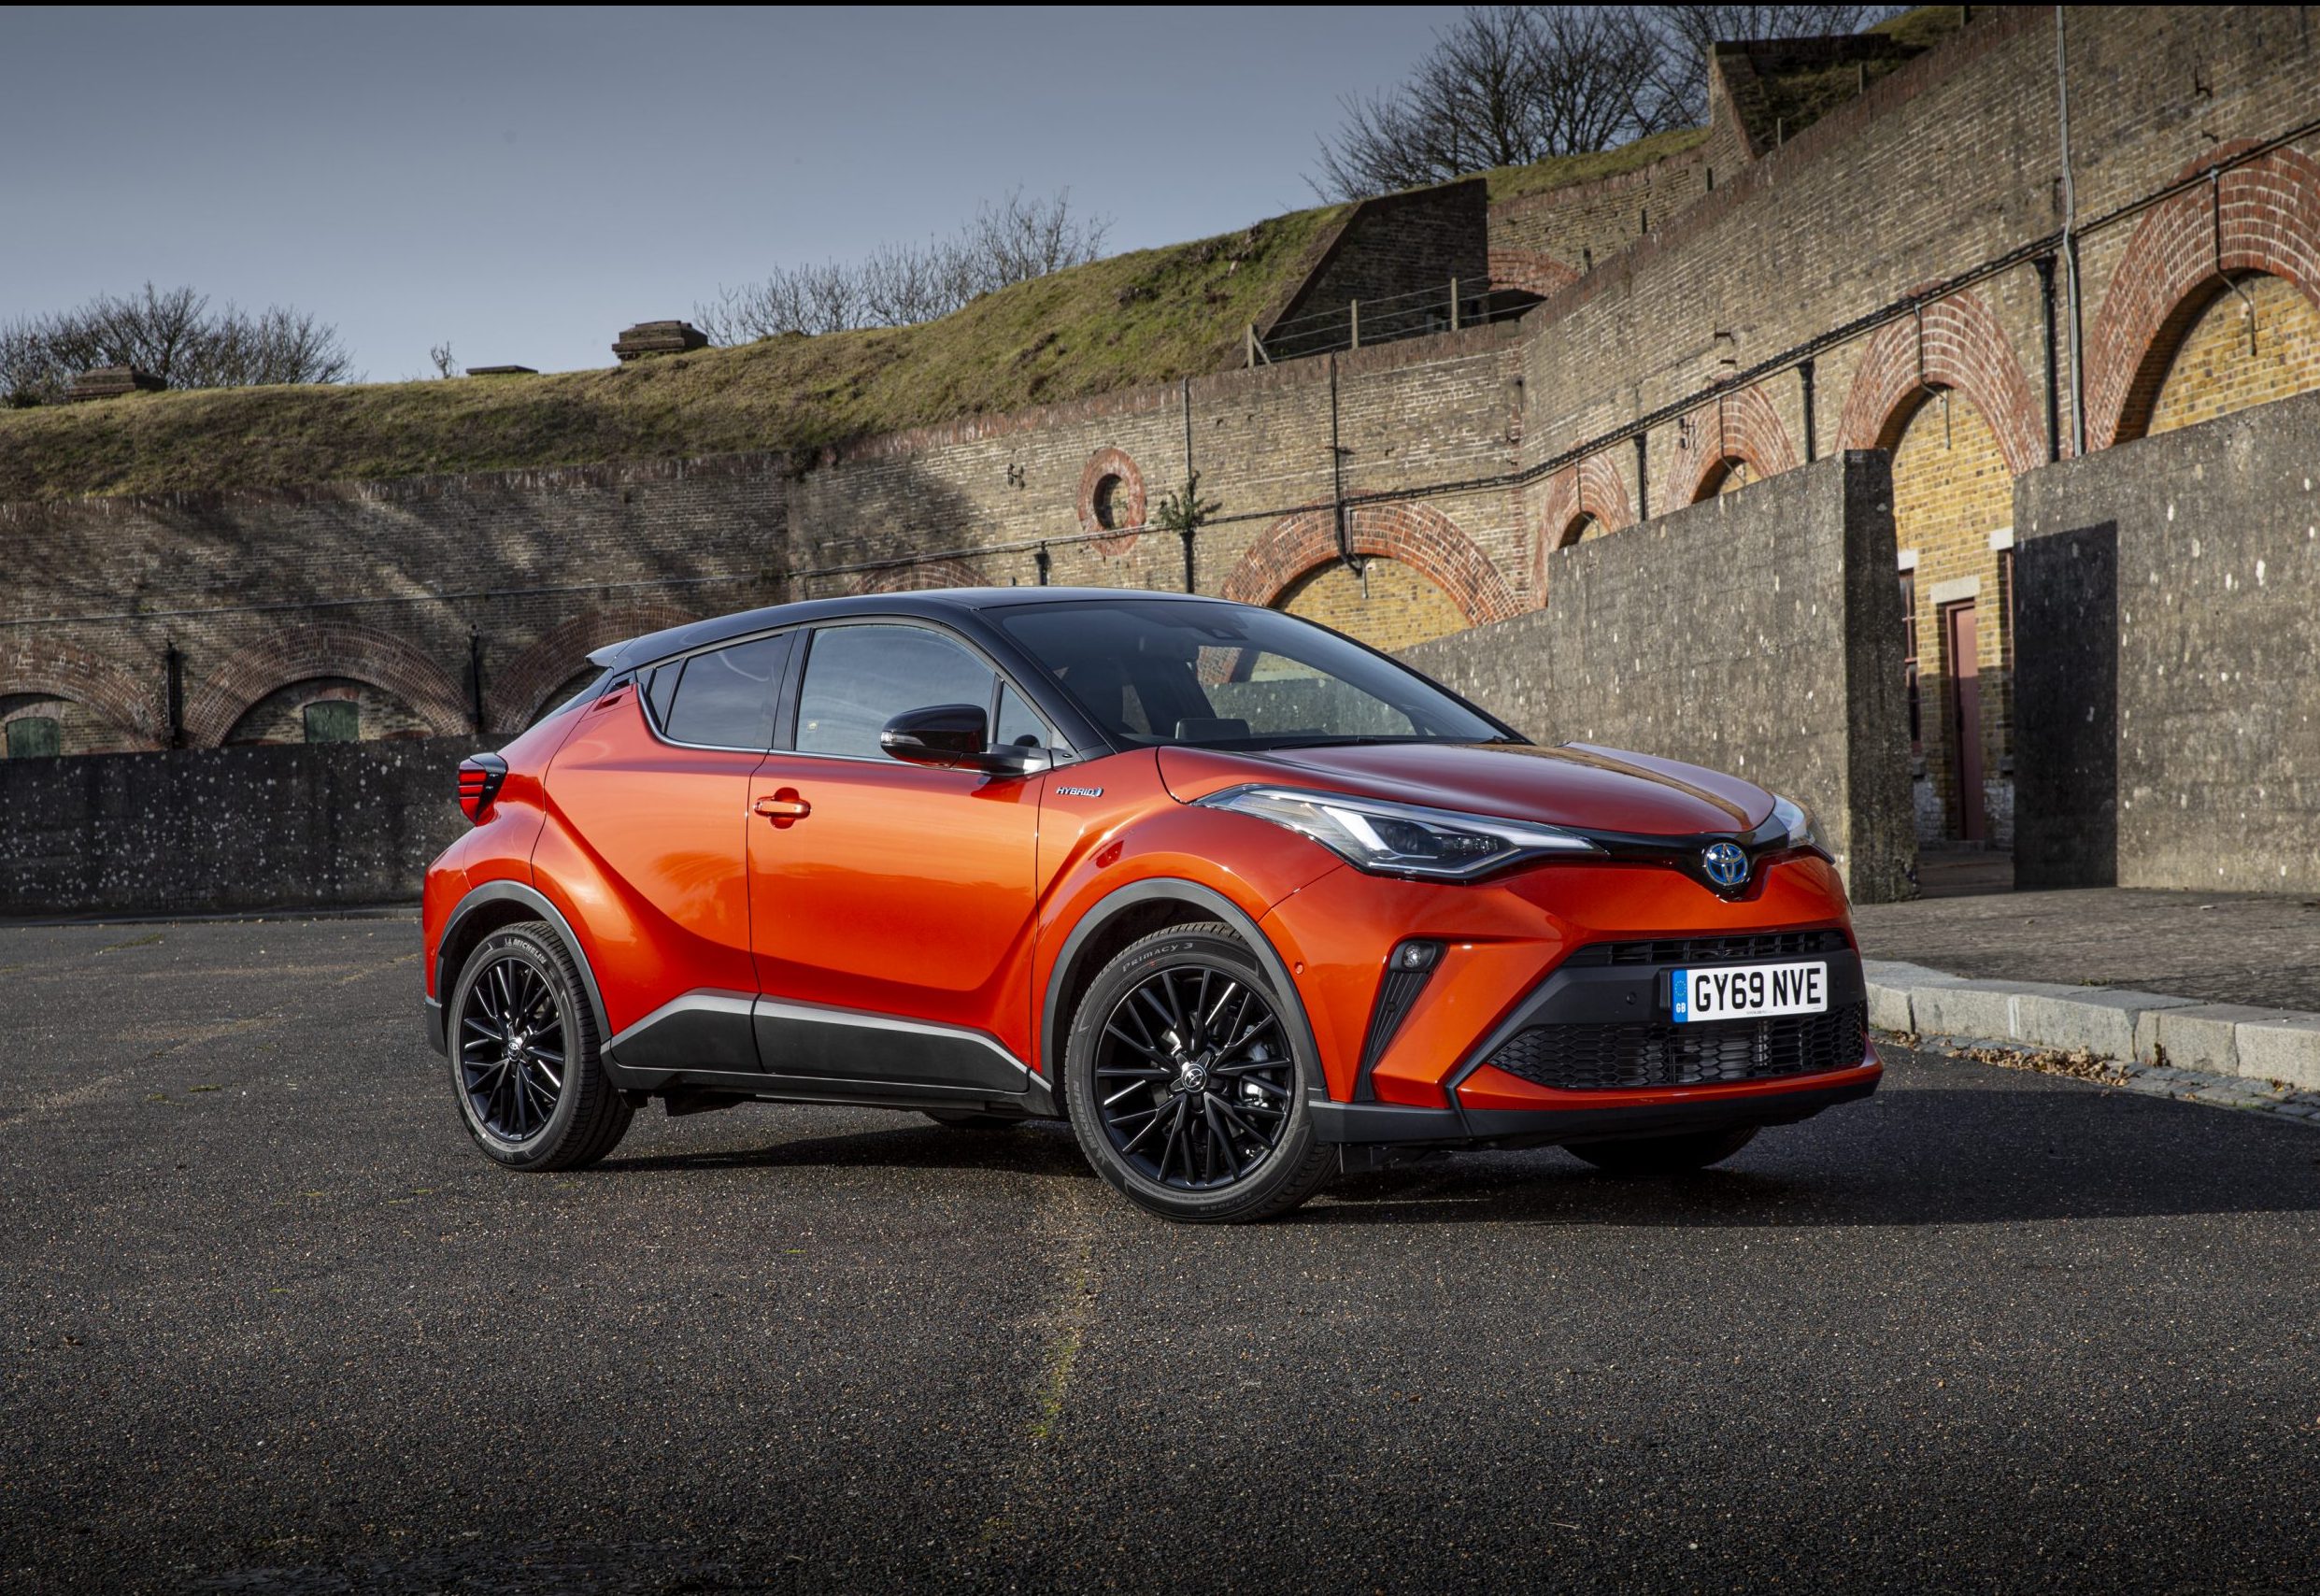 Become part of something new, with the 2022 Toyota C-HR Jan 17, 2022